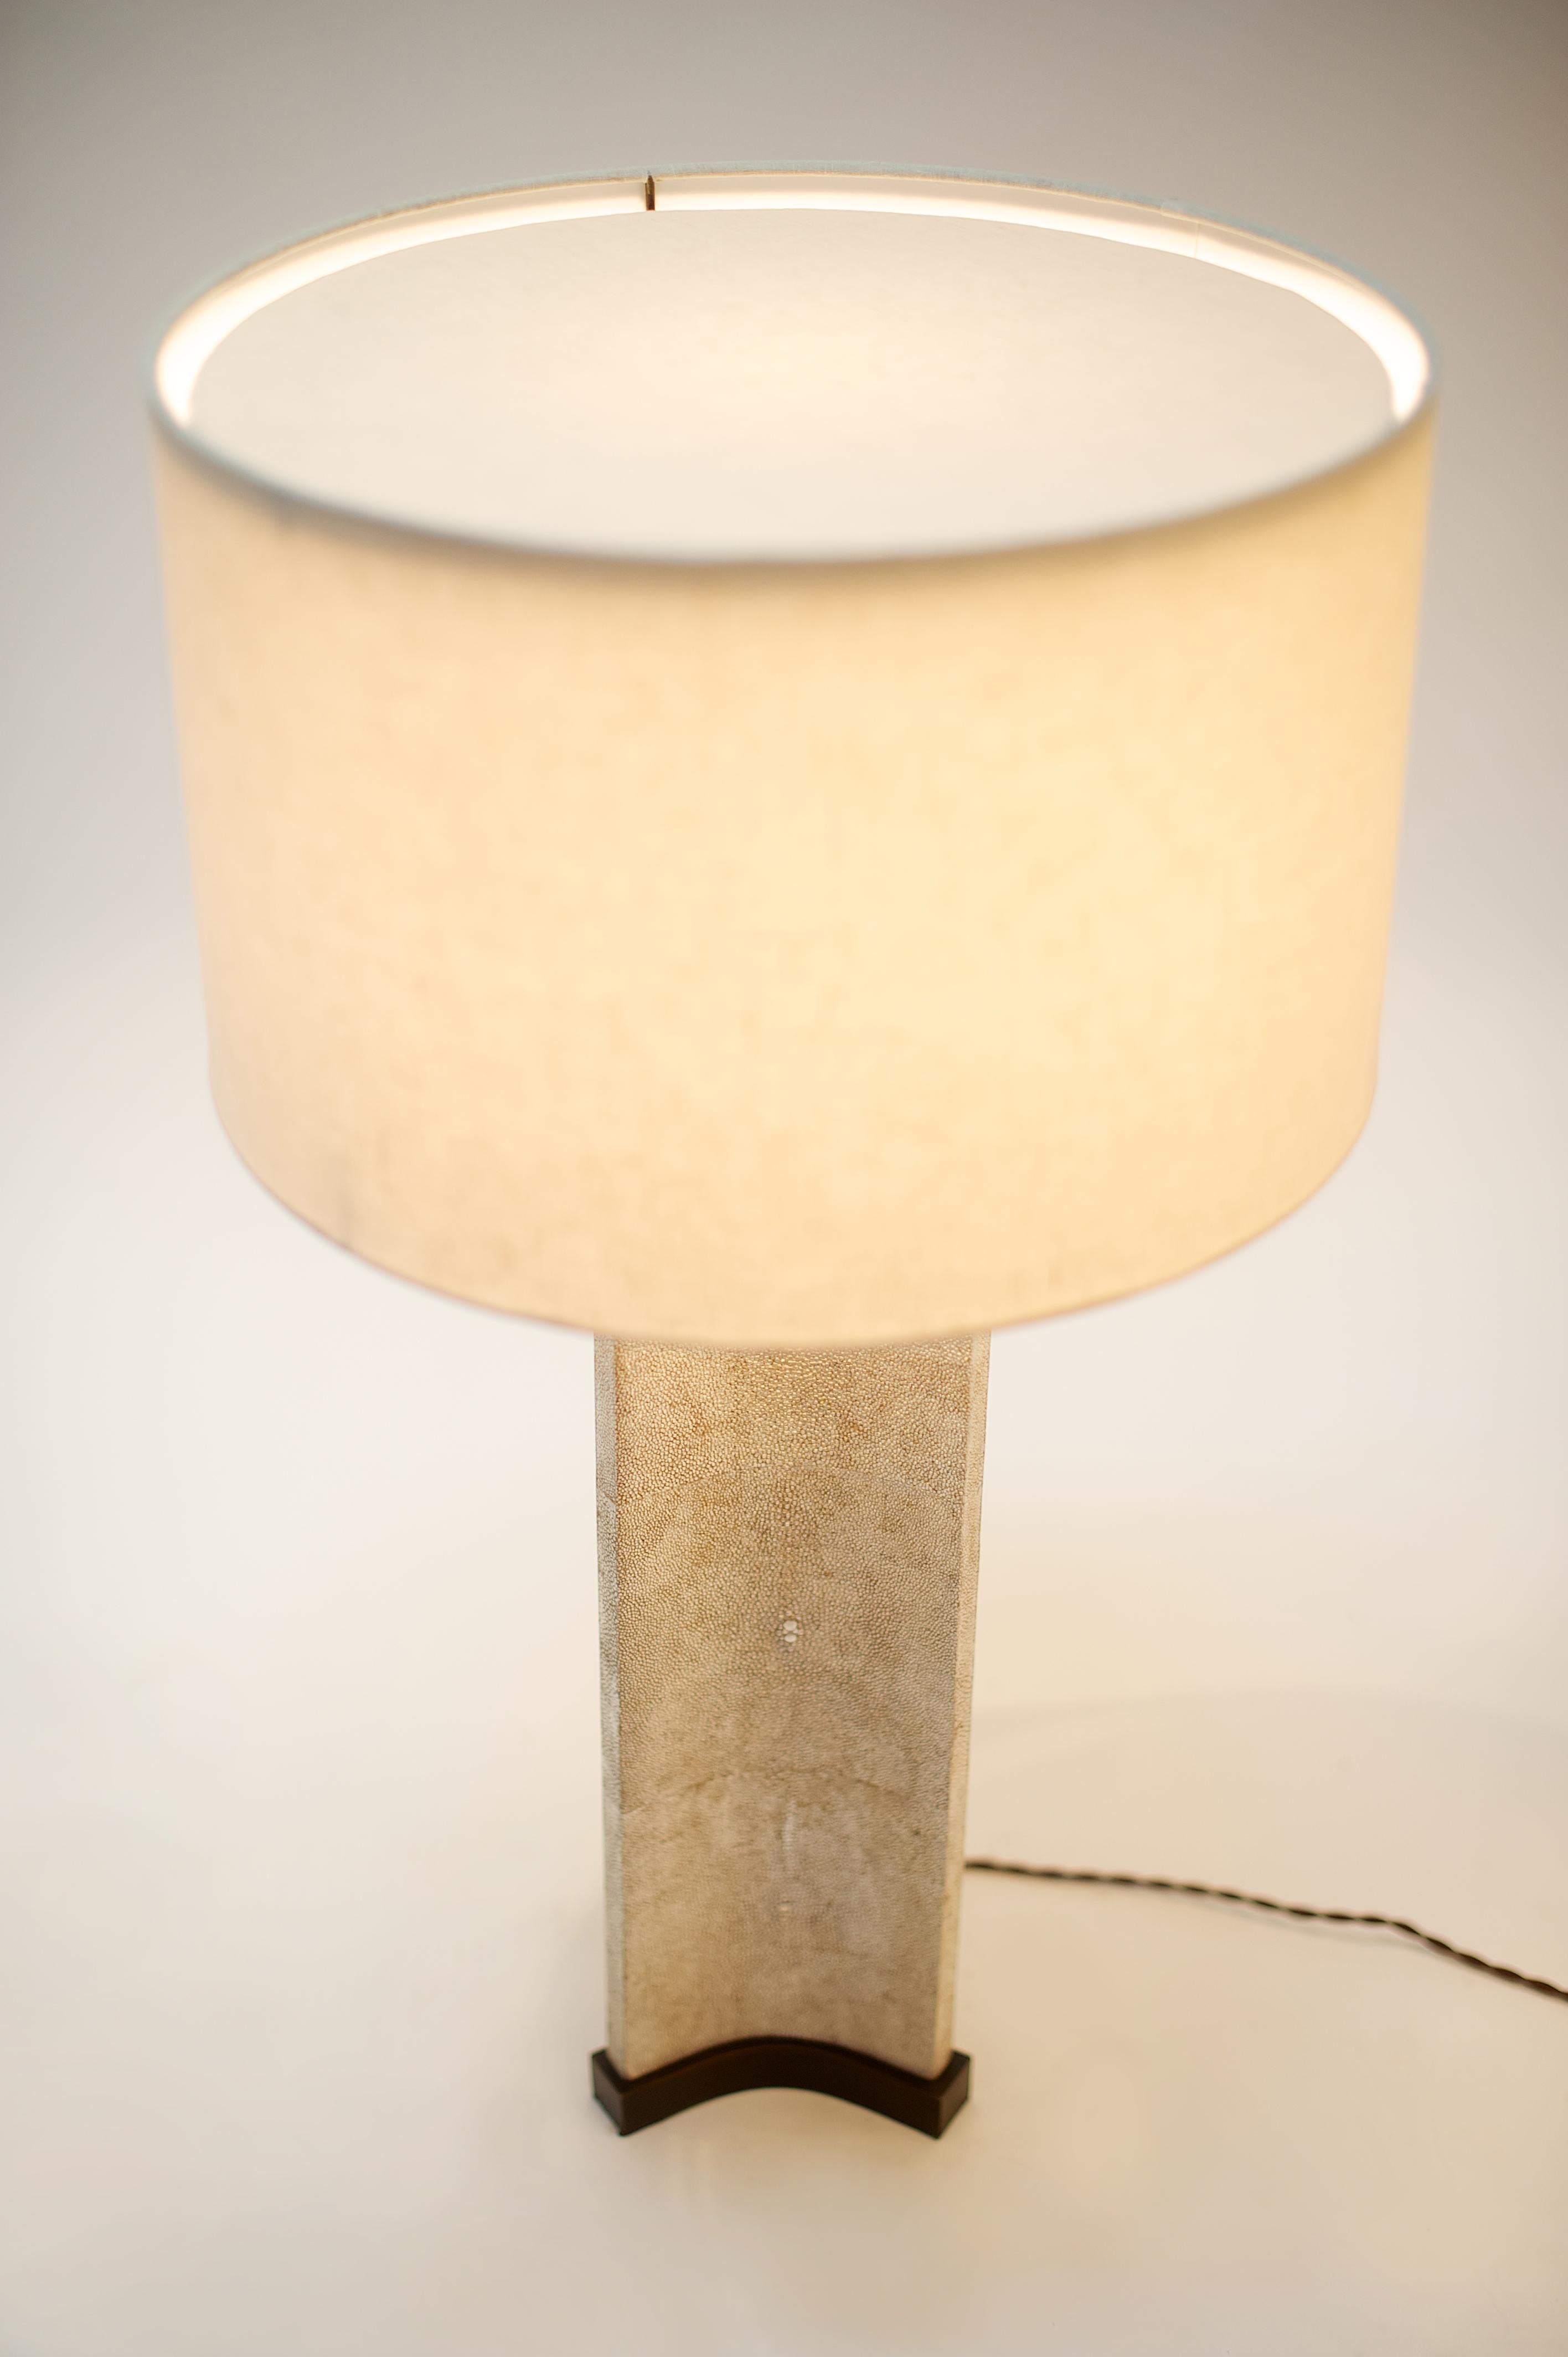 Large Bruno Lamp in Shagreen and Bronze by Elan Atelier

Sculptural lamp in cast bronze and shagreen by Elan Atelier in large size. Custom sizes and finishes available.

Dimensions/
Small/
dia 9.8 x h 15.7 in
dia 25 x h 40 cm

Large/
dia 13.8 x h